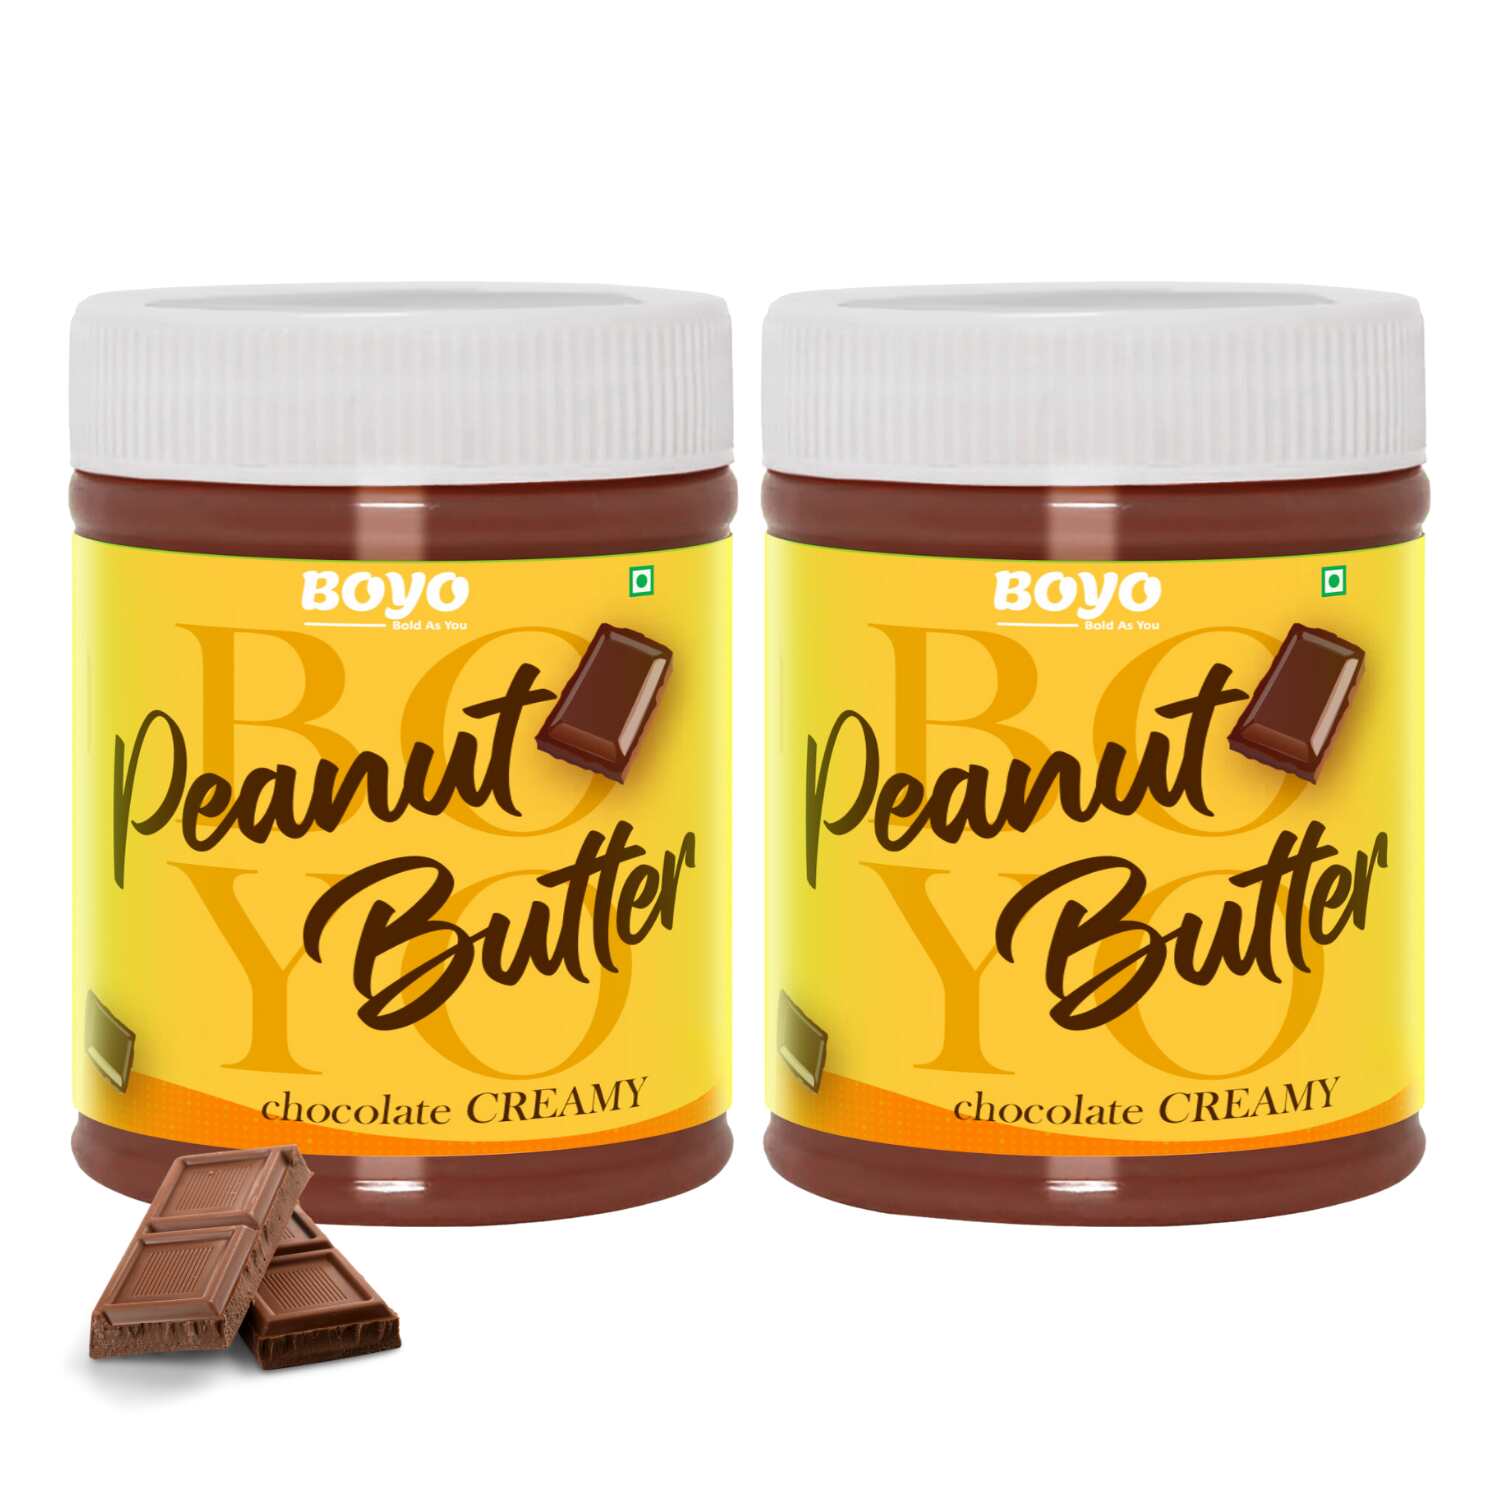 Peanut Butter Combo Chocolate Creamy 510g Each - Pack of 2